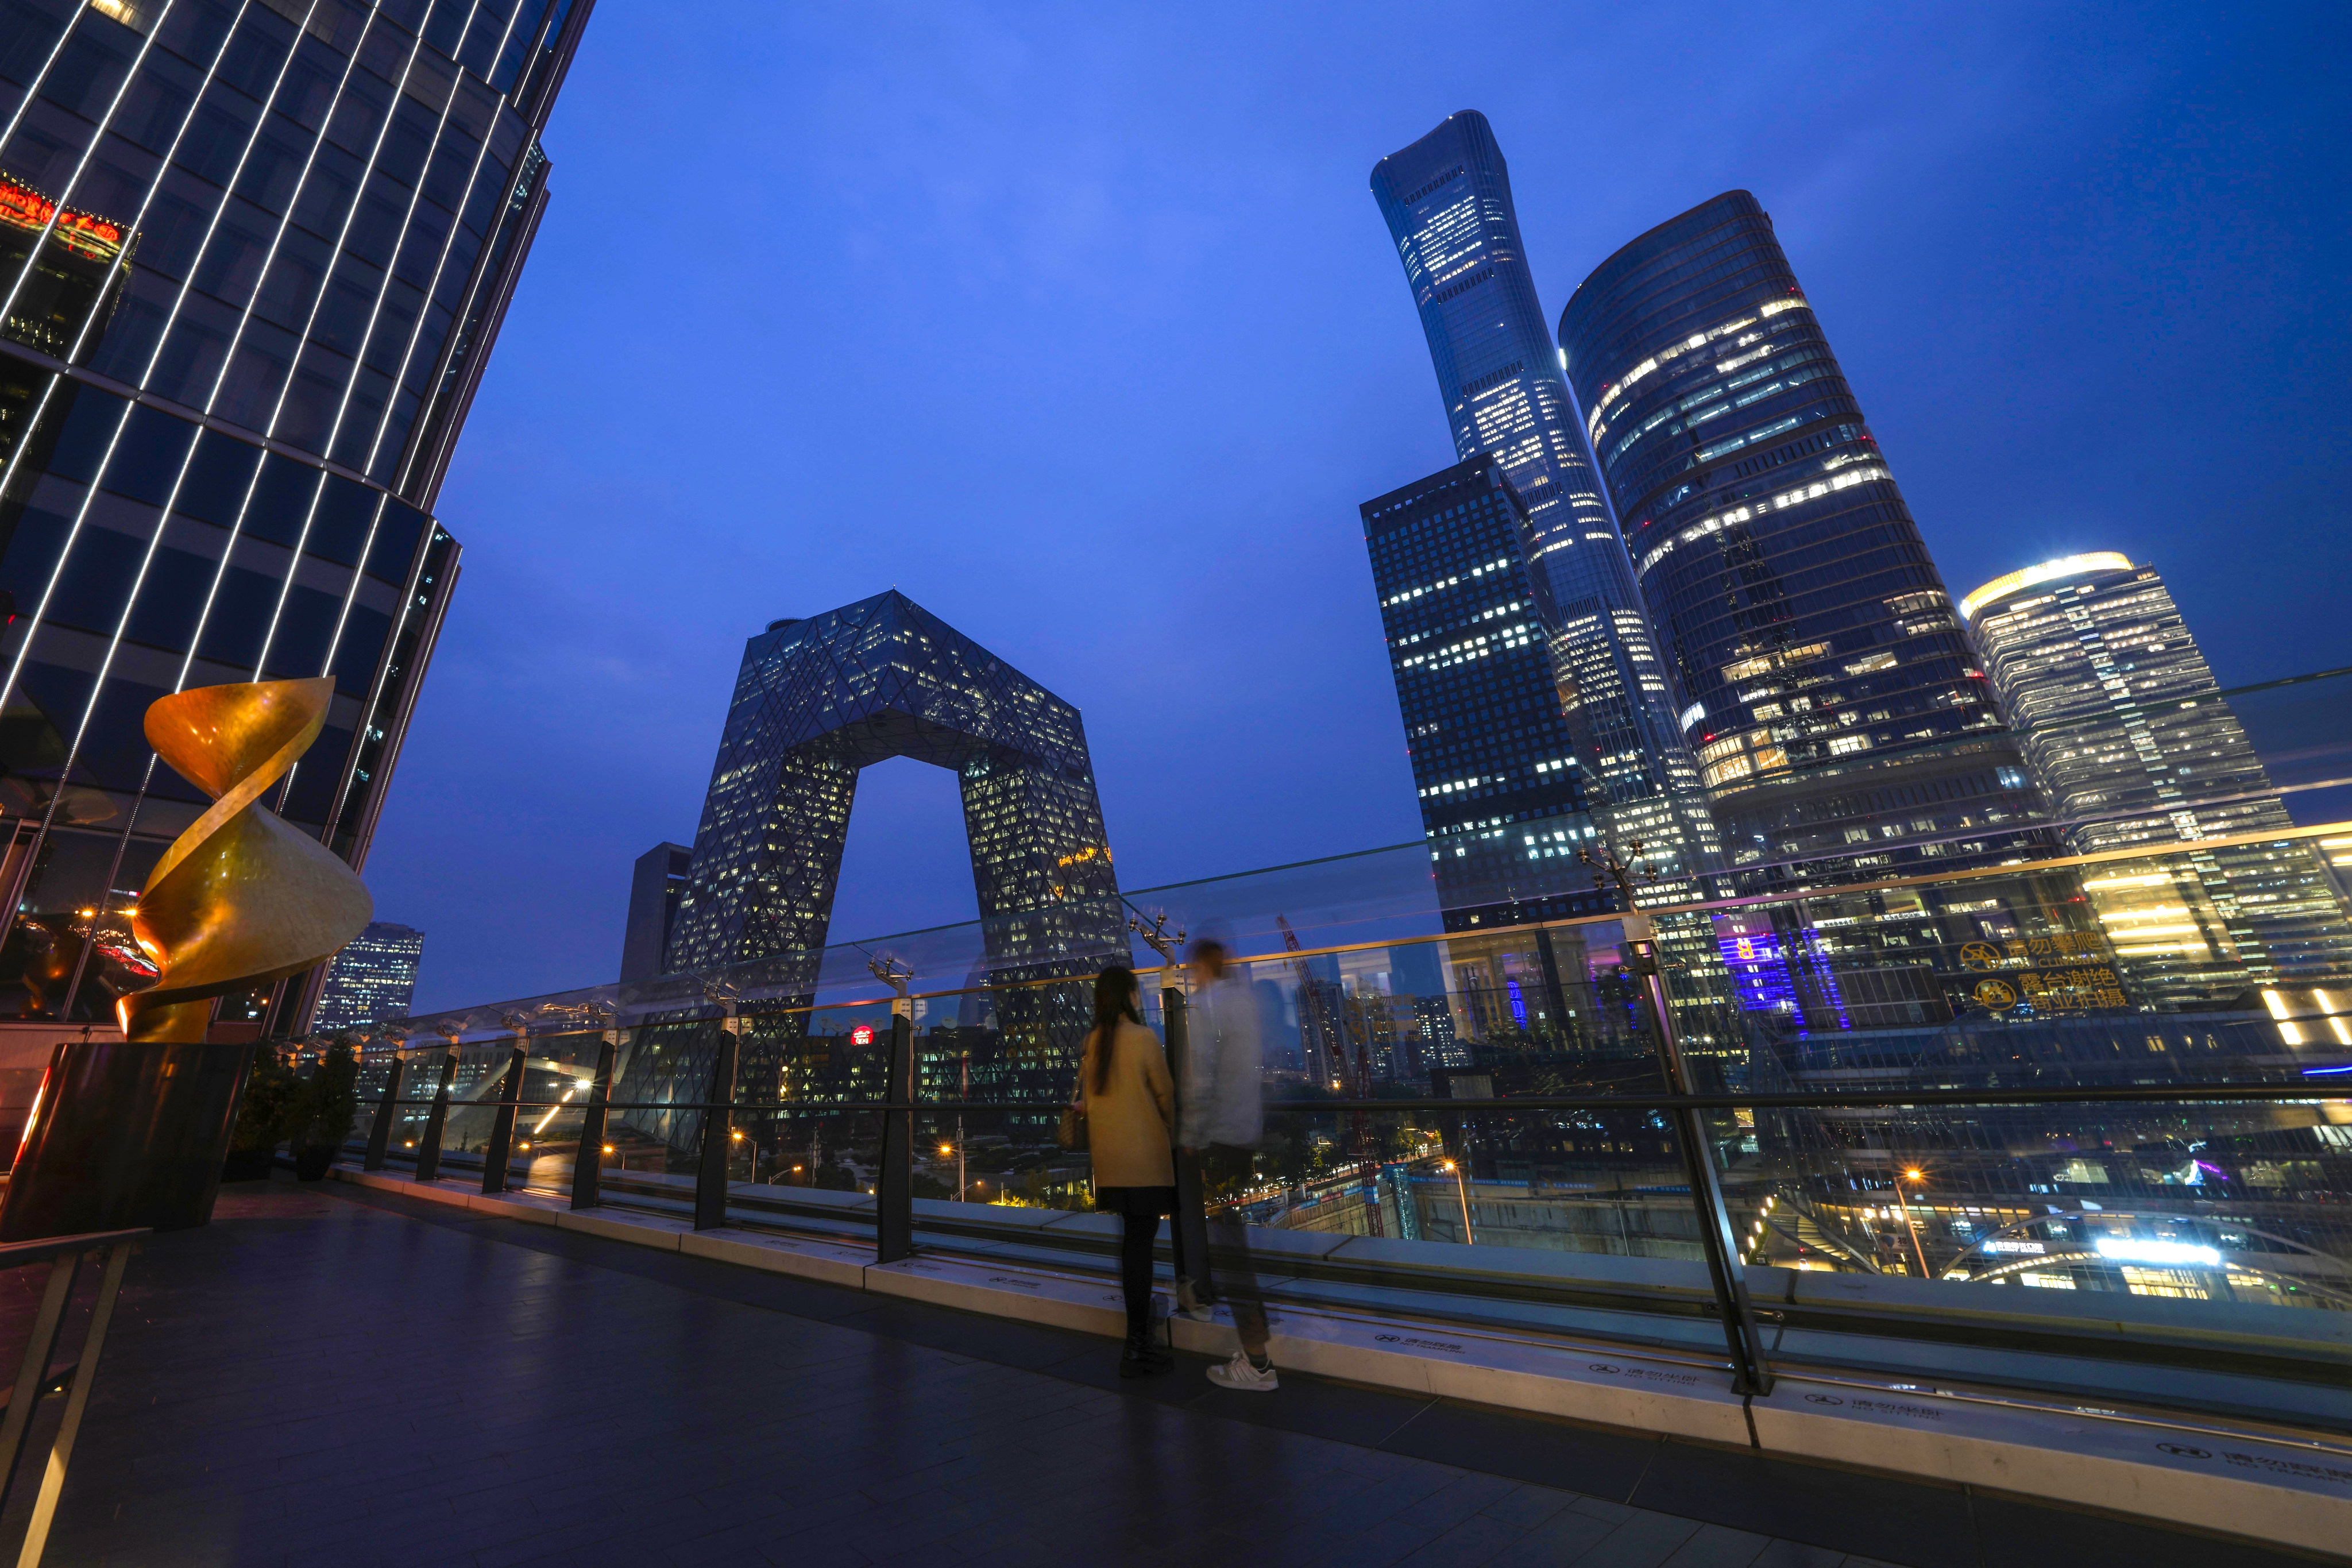 People linger in the Central Business District in Beijing on October 26, 2022. Photo: AP